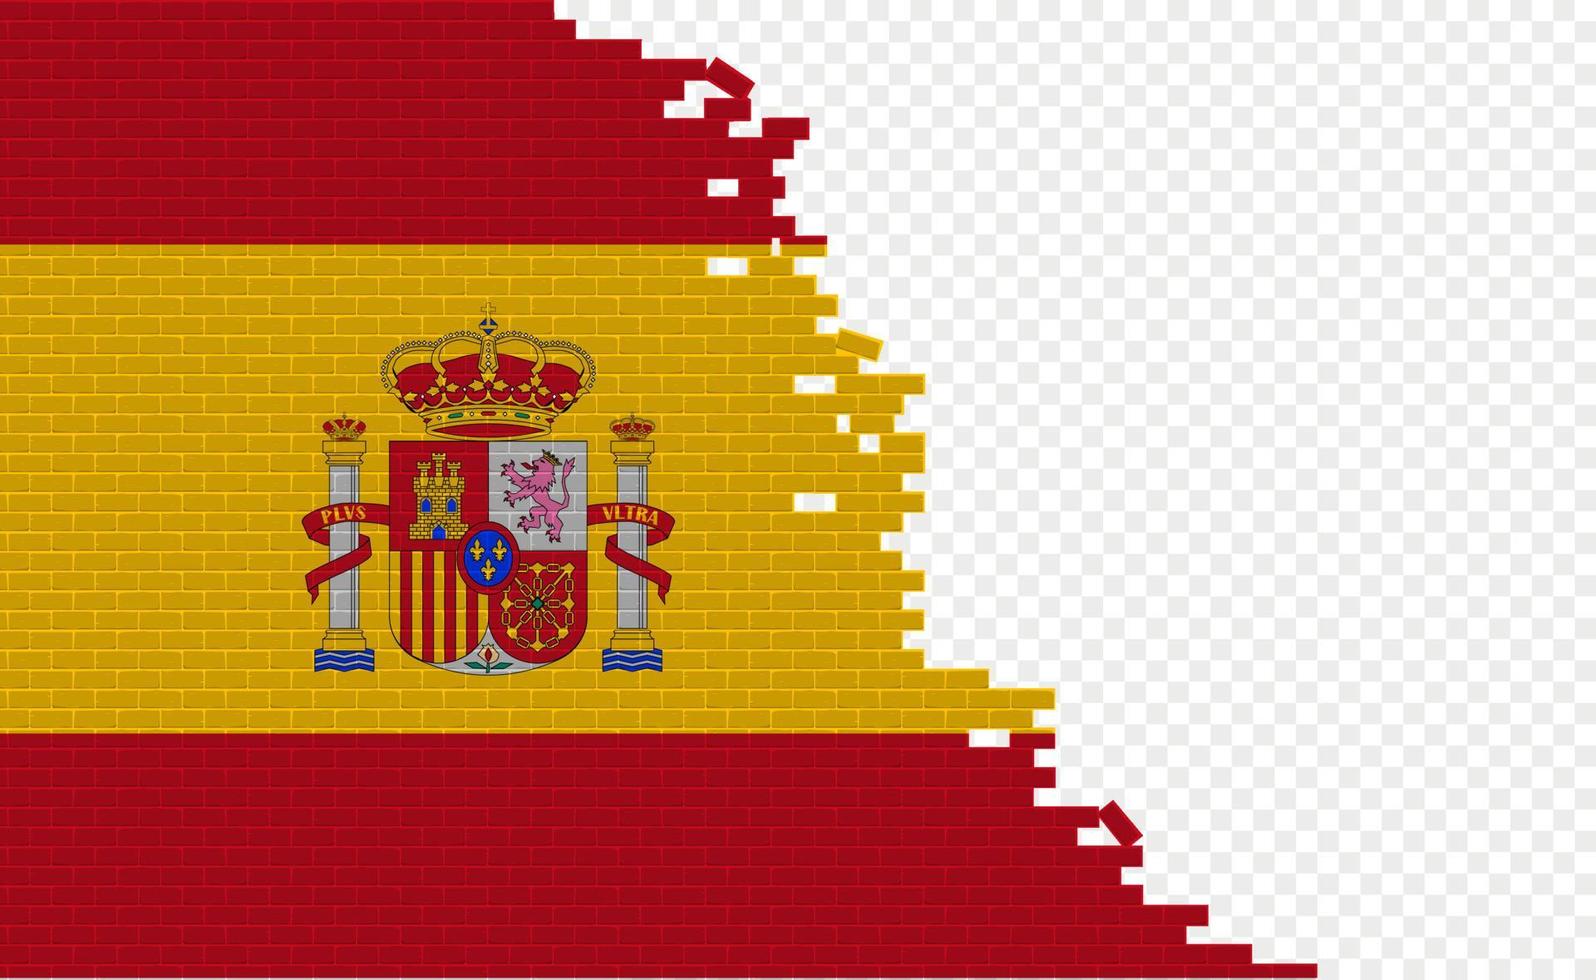 Spain flag on broken brick wall. Empty flag field of another country. Country comparison. Easy editing and vector in groups.